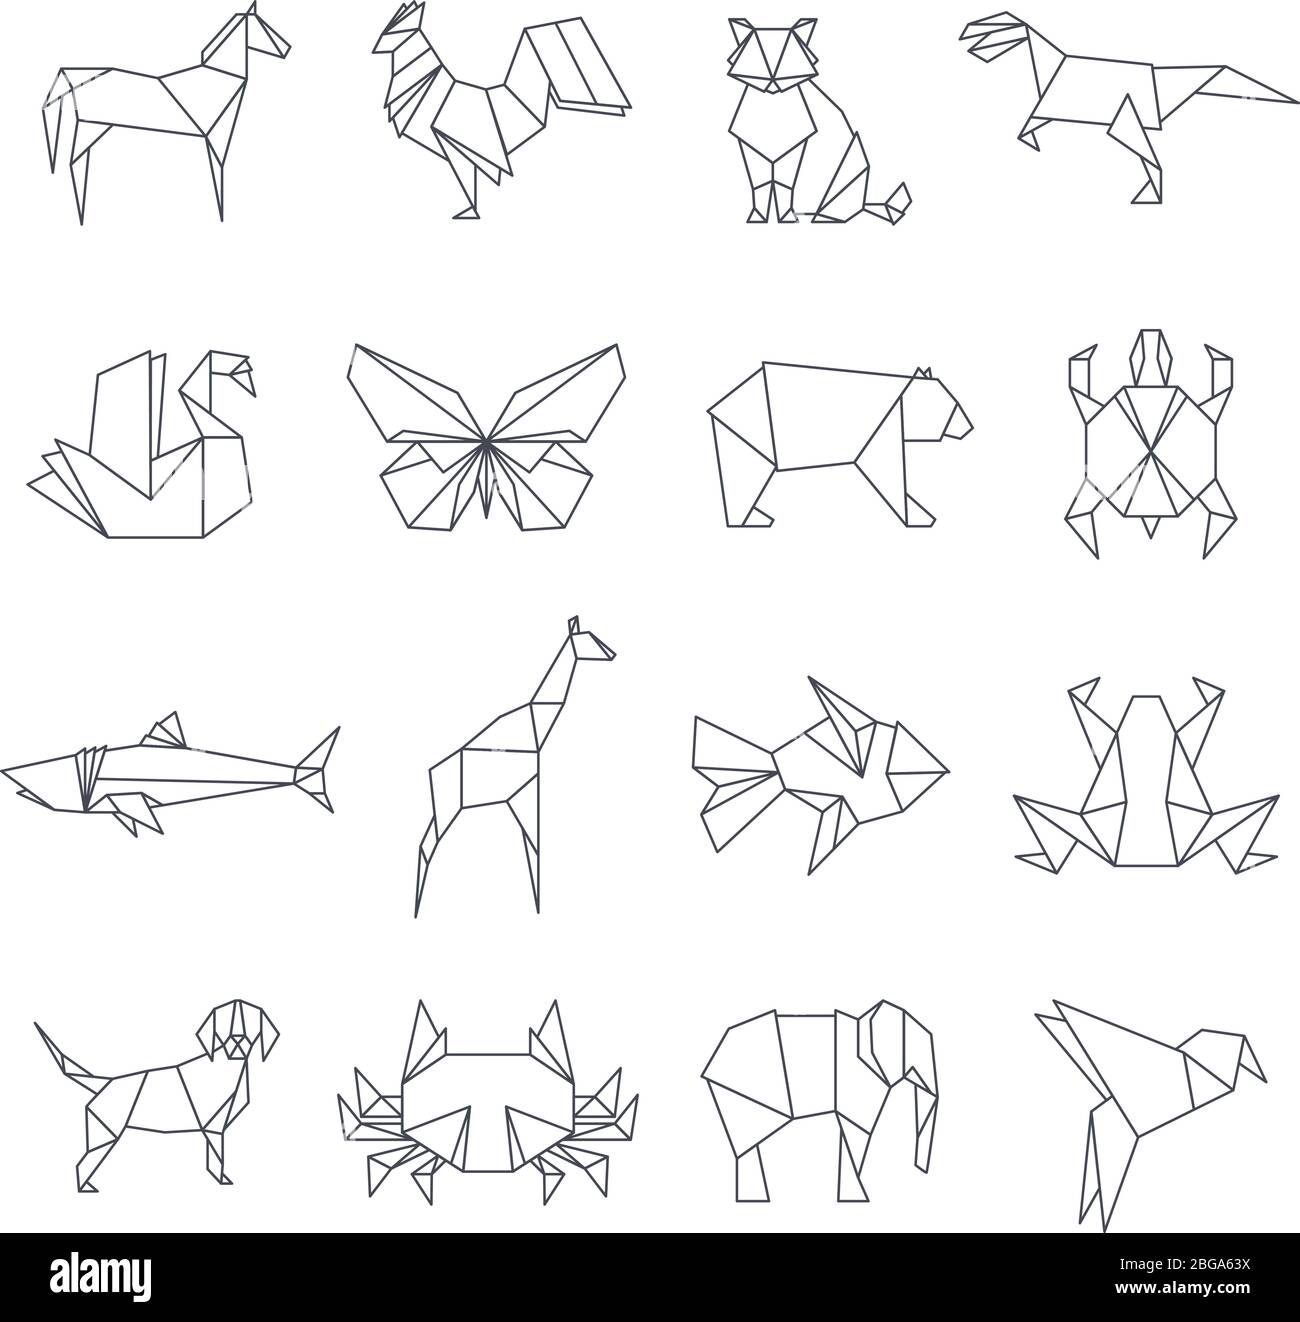 Japanese origami paper animals vector line icons. Set of origami animal shape geometric illustration Stock Vector